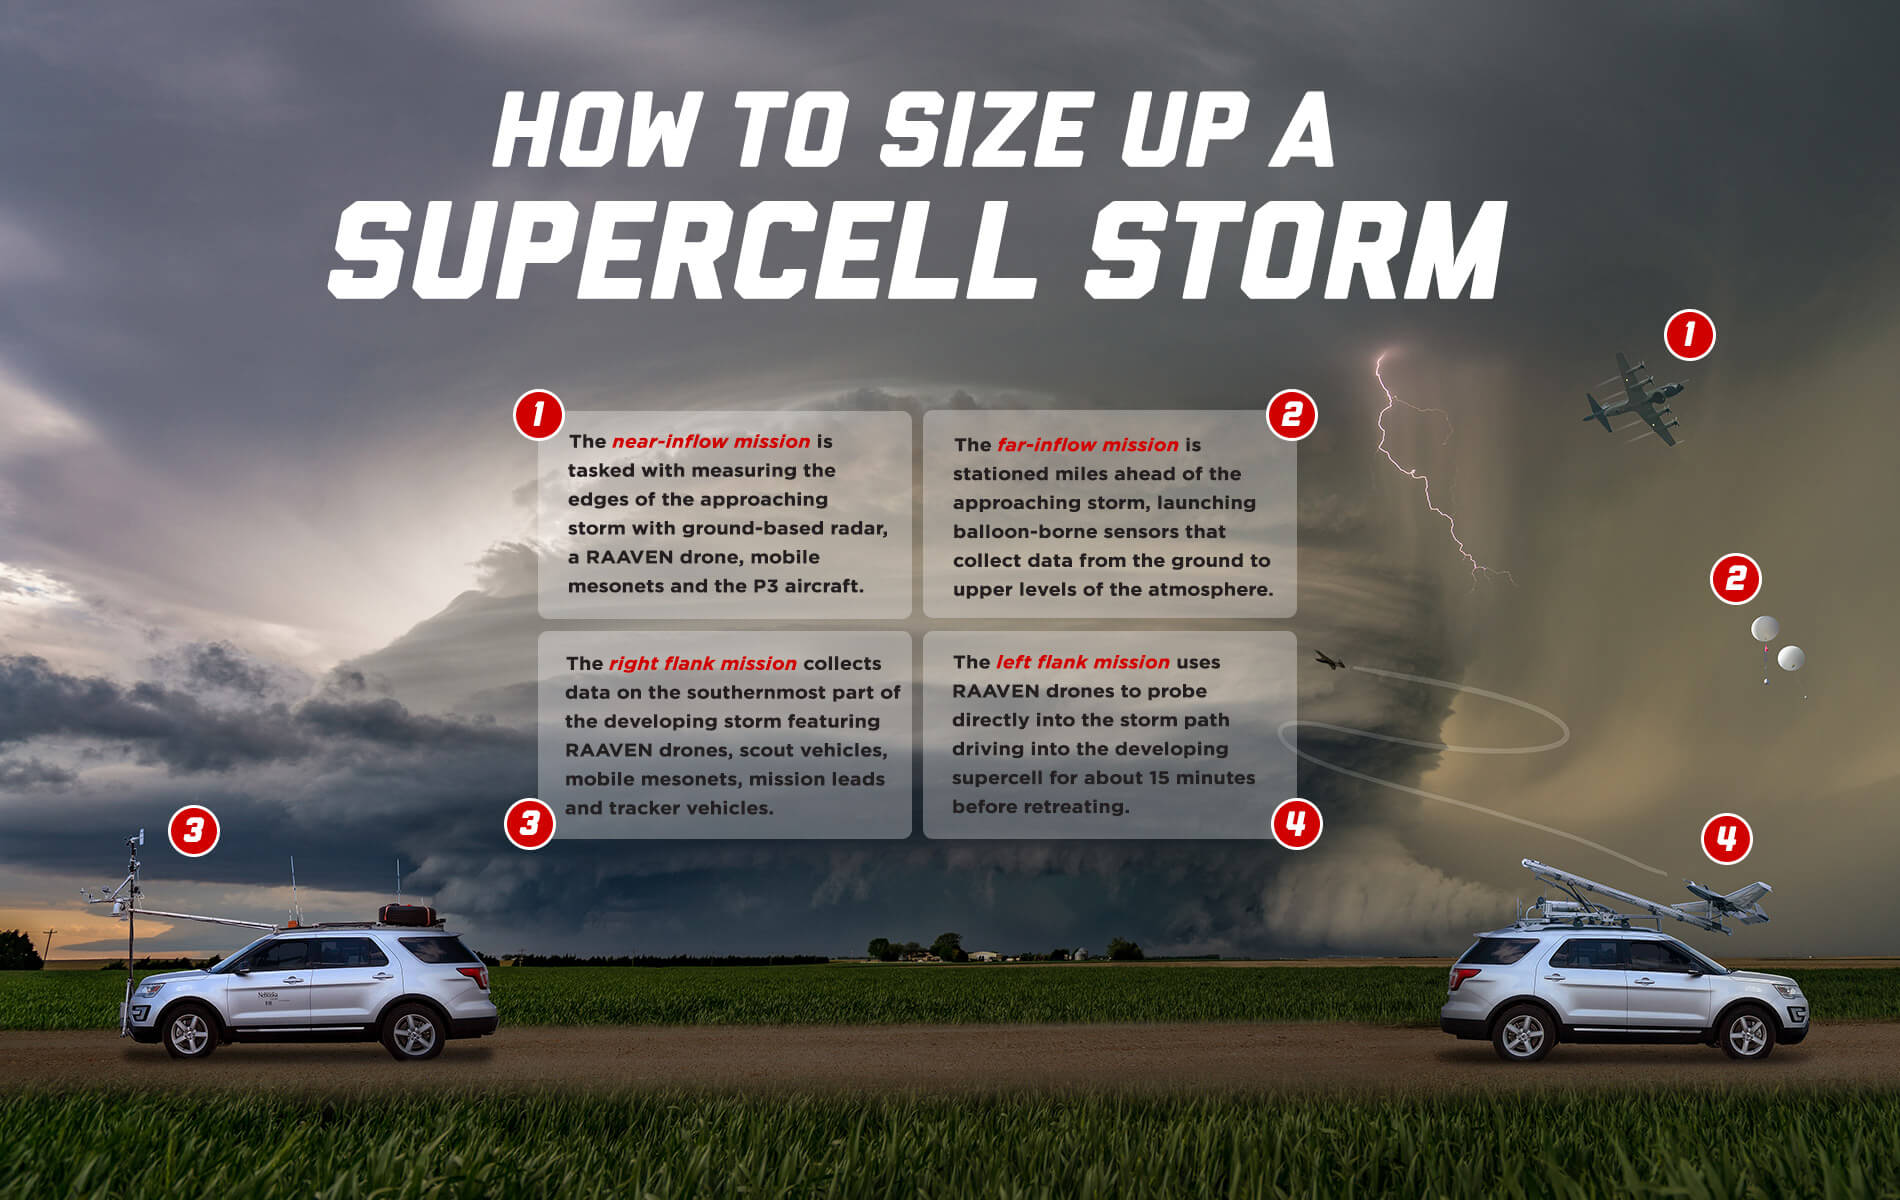 How to size up a supercell storm.